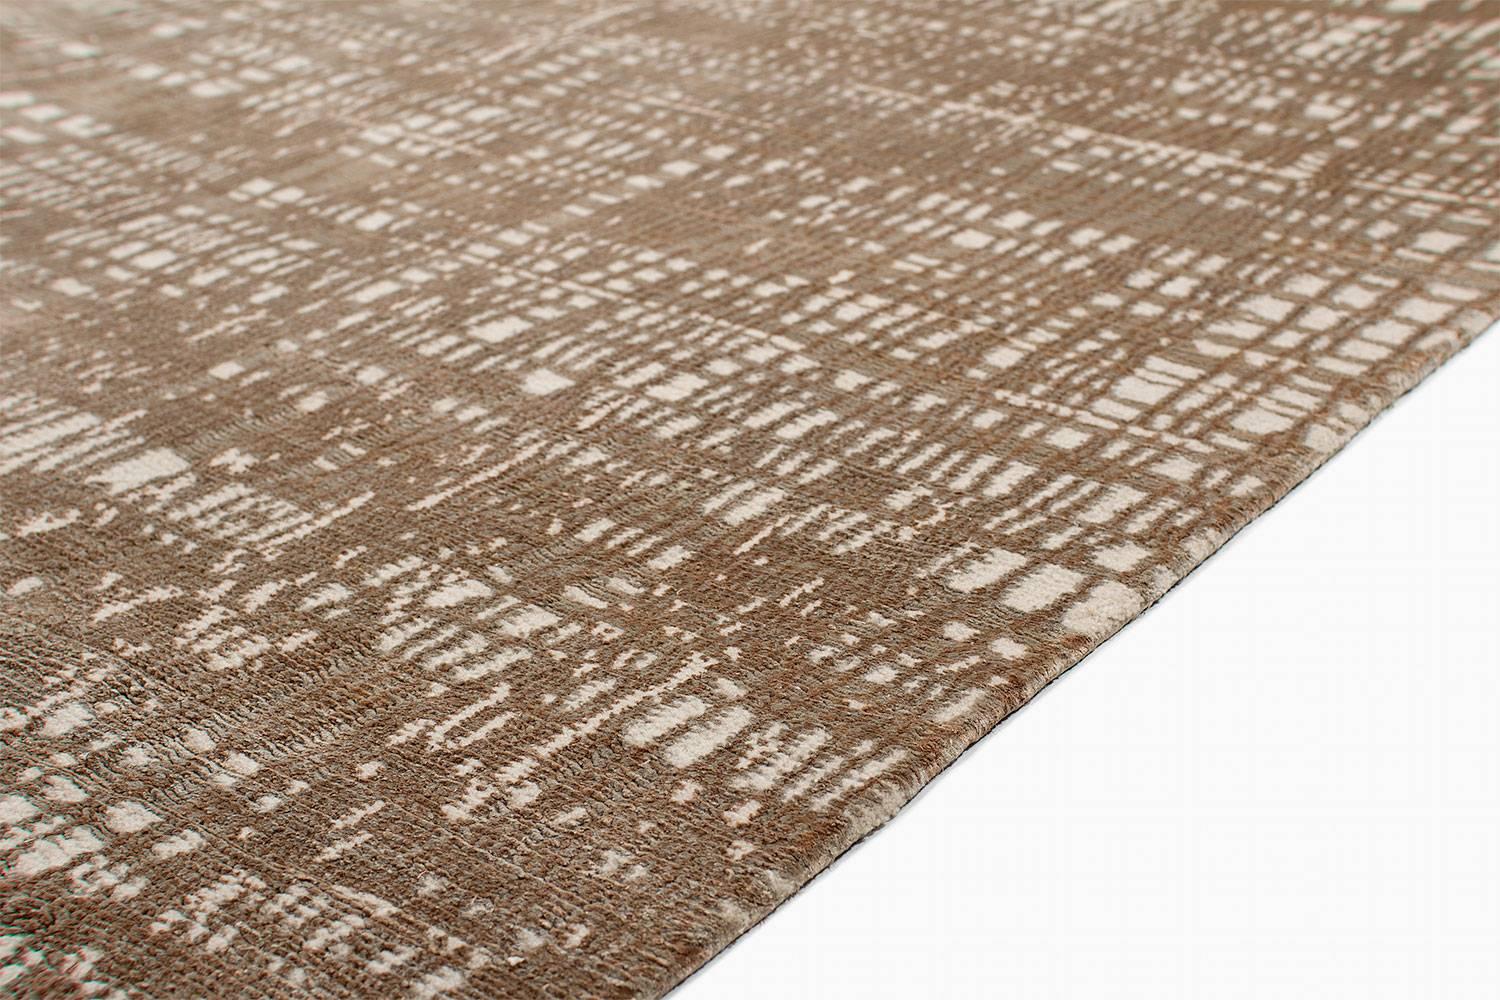 Scratchout is an original design from Joseph Carini's couture collection. This area rug is made with silk and wool and has an incredible shimmering surface. The pile is sumptuous. A classic contemporary rug.